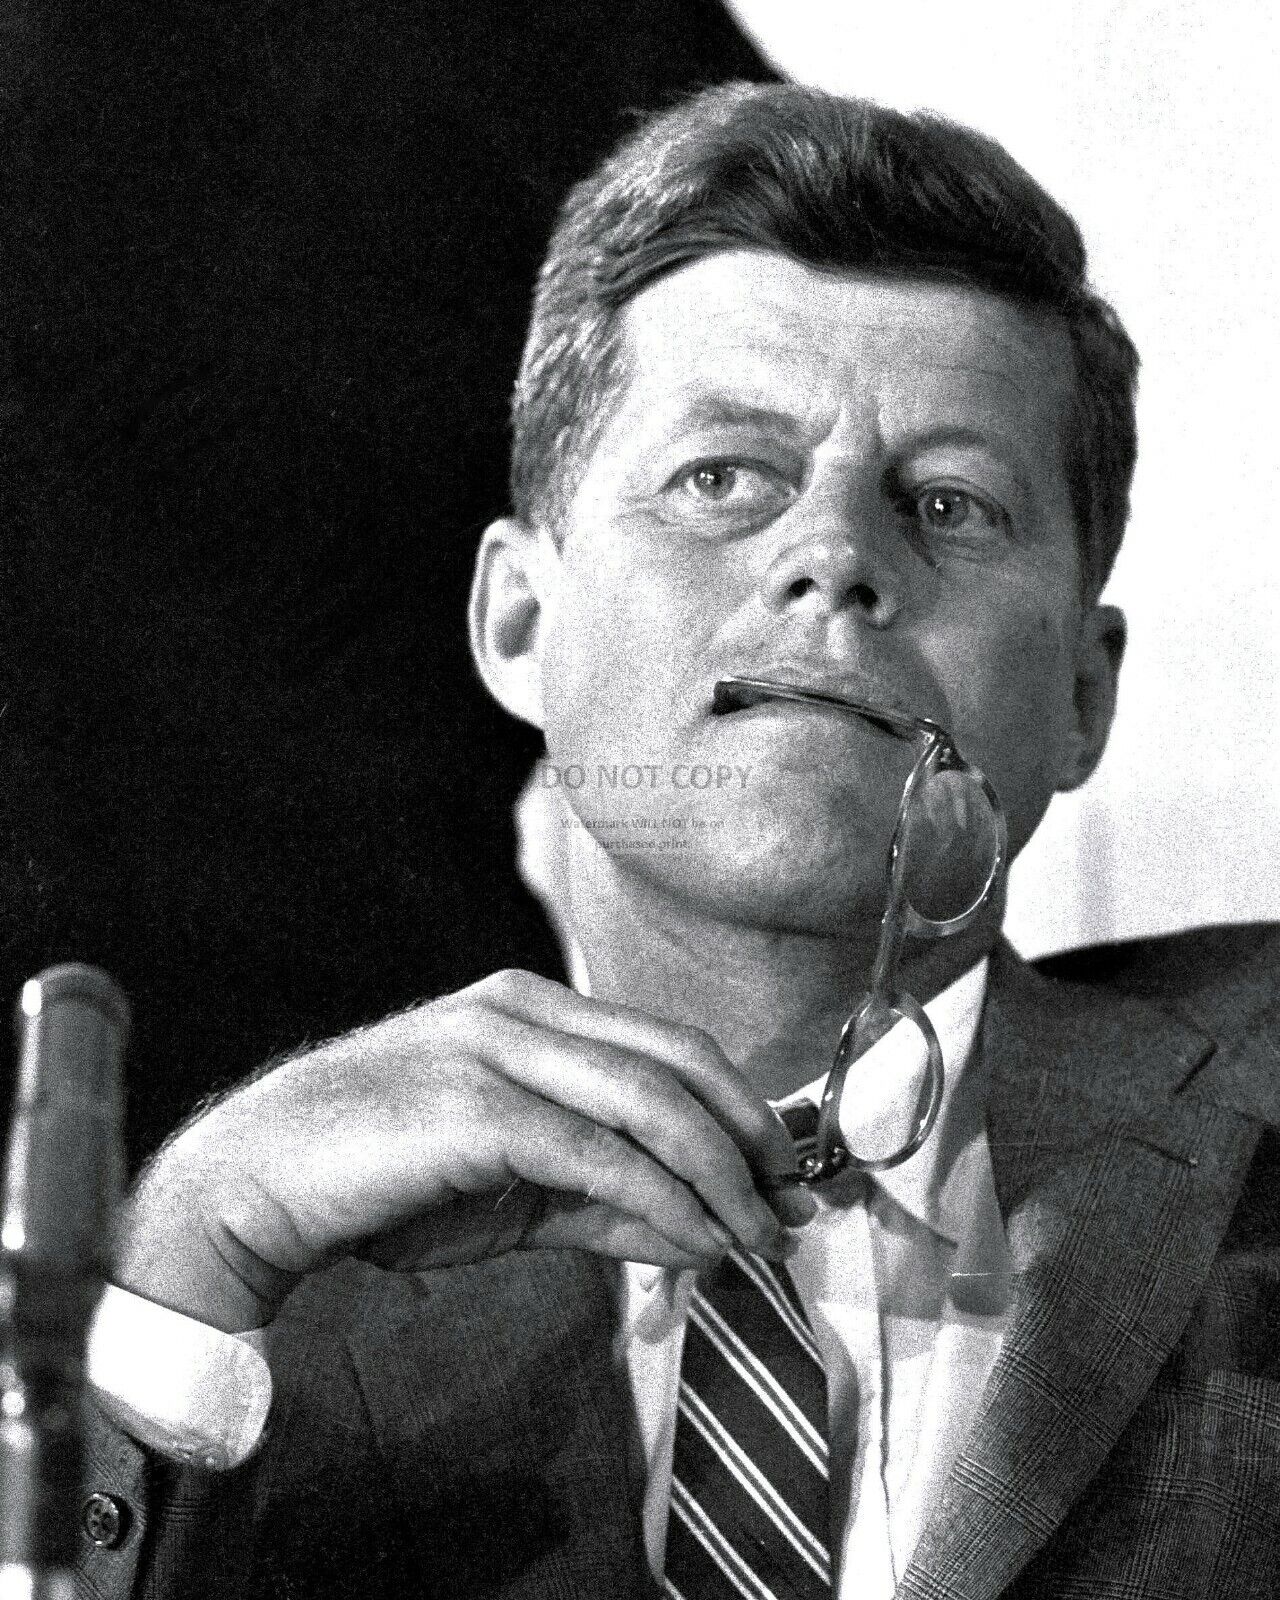 JOHN F. KENNEDY 35th PRESIDENT OF THE UNITED STATES - 8X10 PHOTO (OP-765)